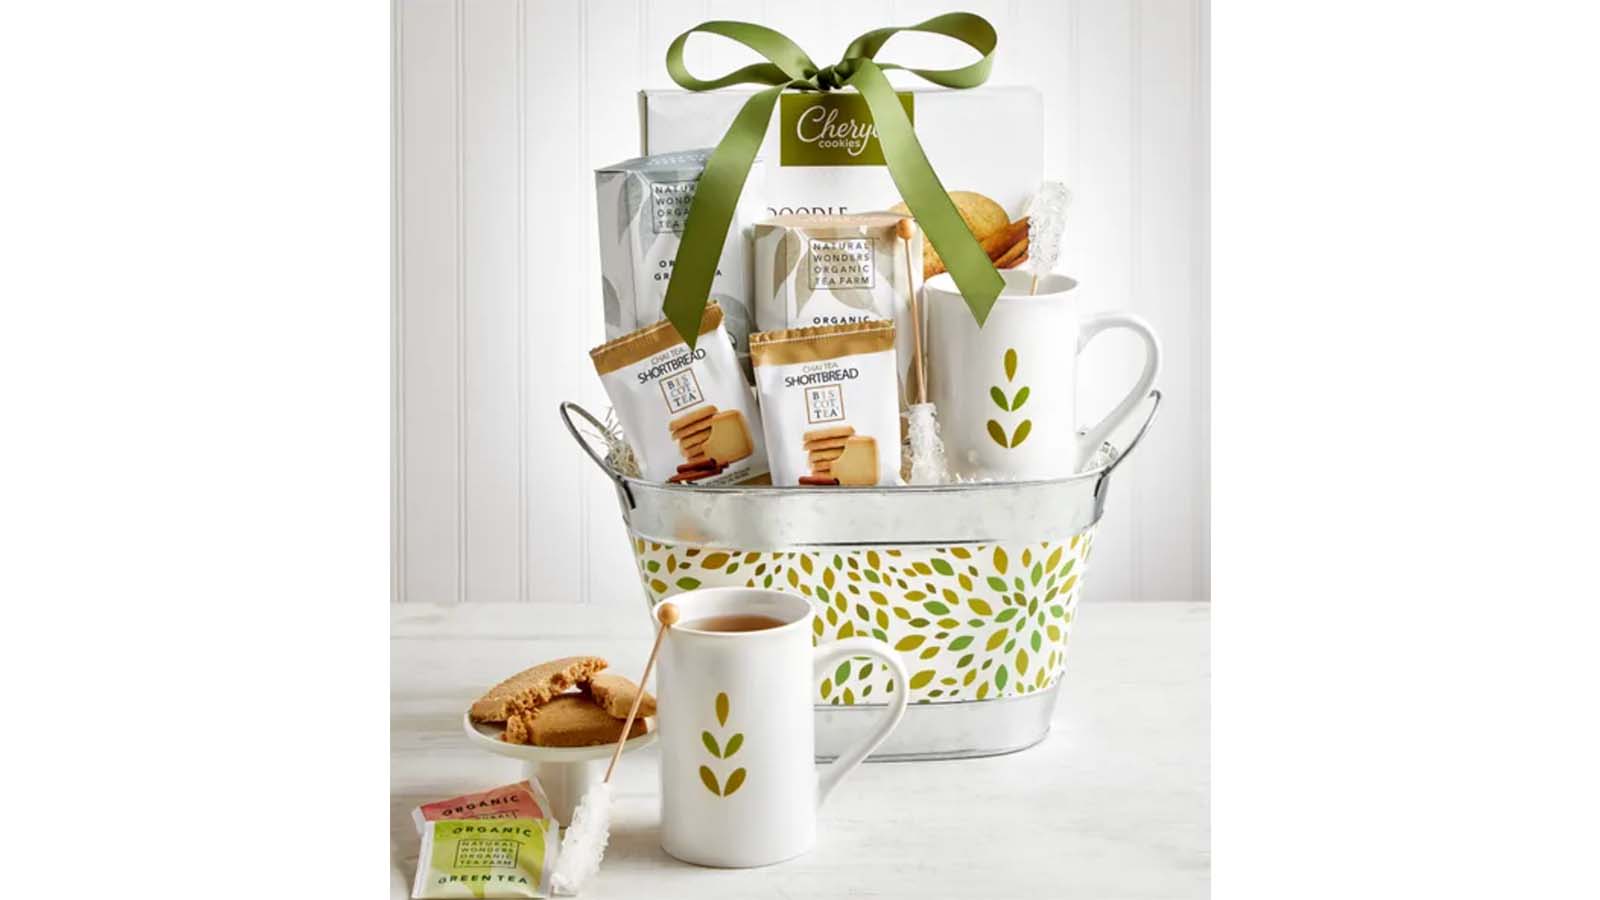 Mothers Day Gift Baskets: Mothers Day Coffee Gift Basket